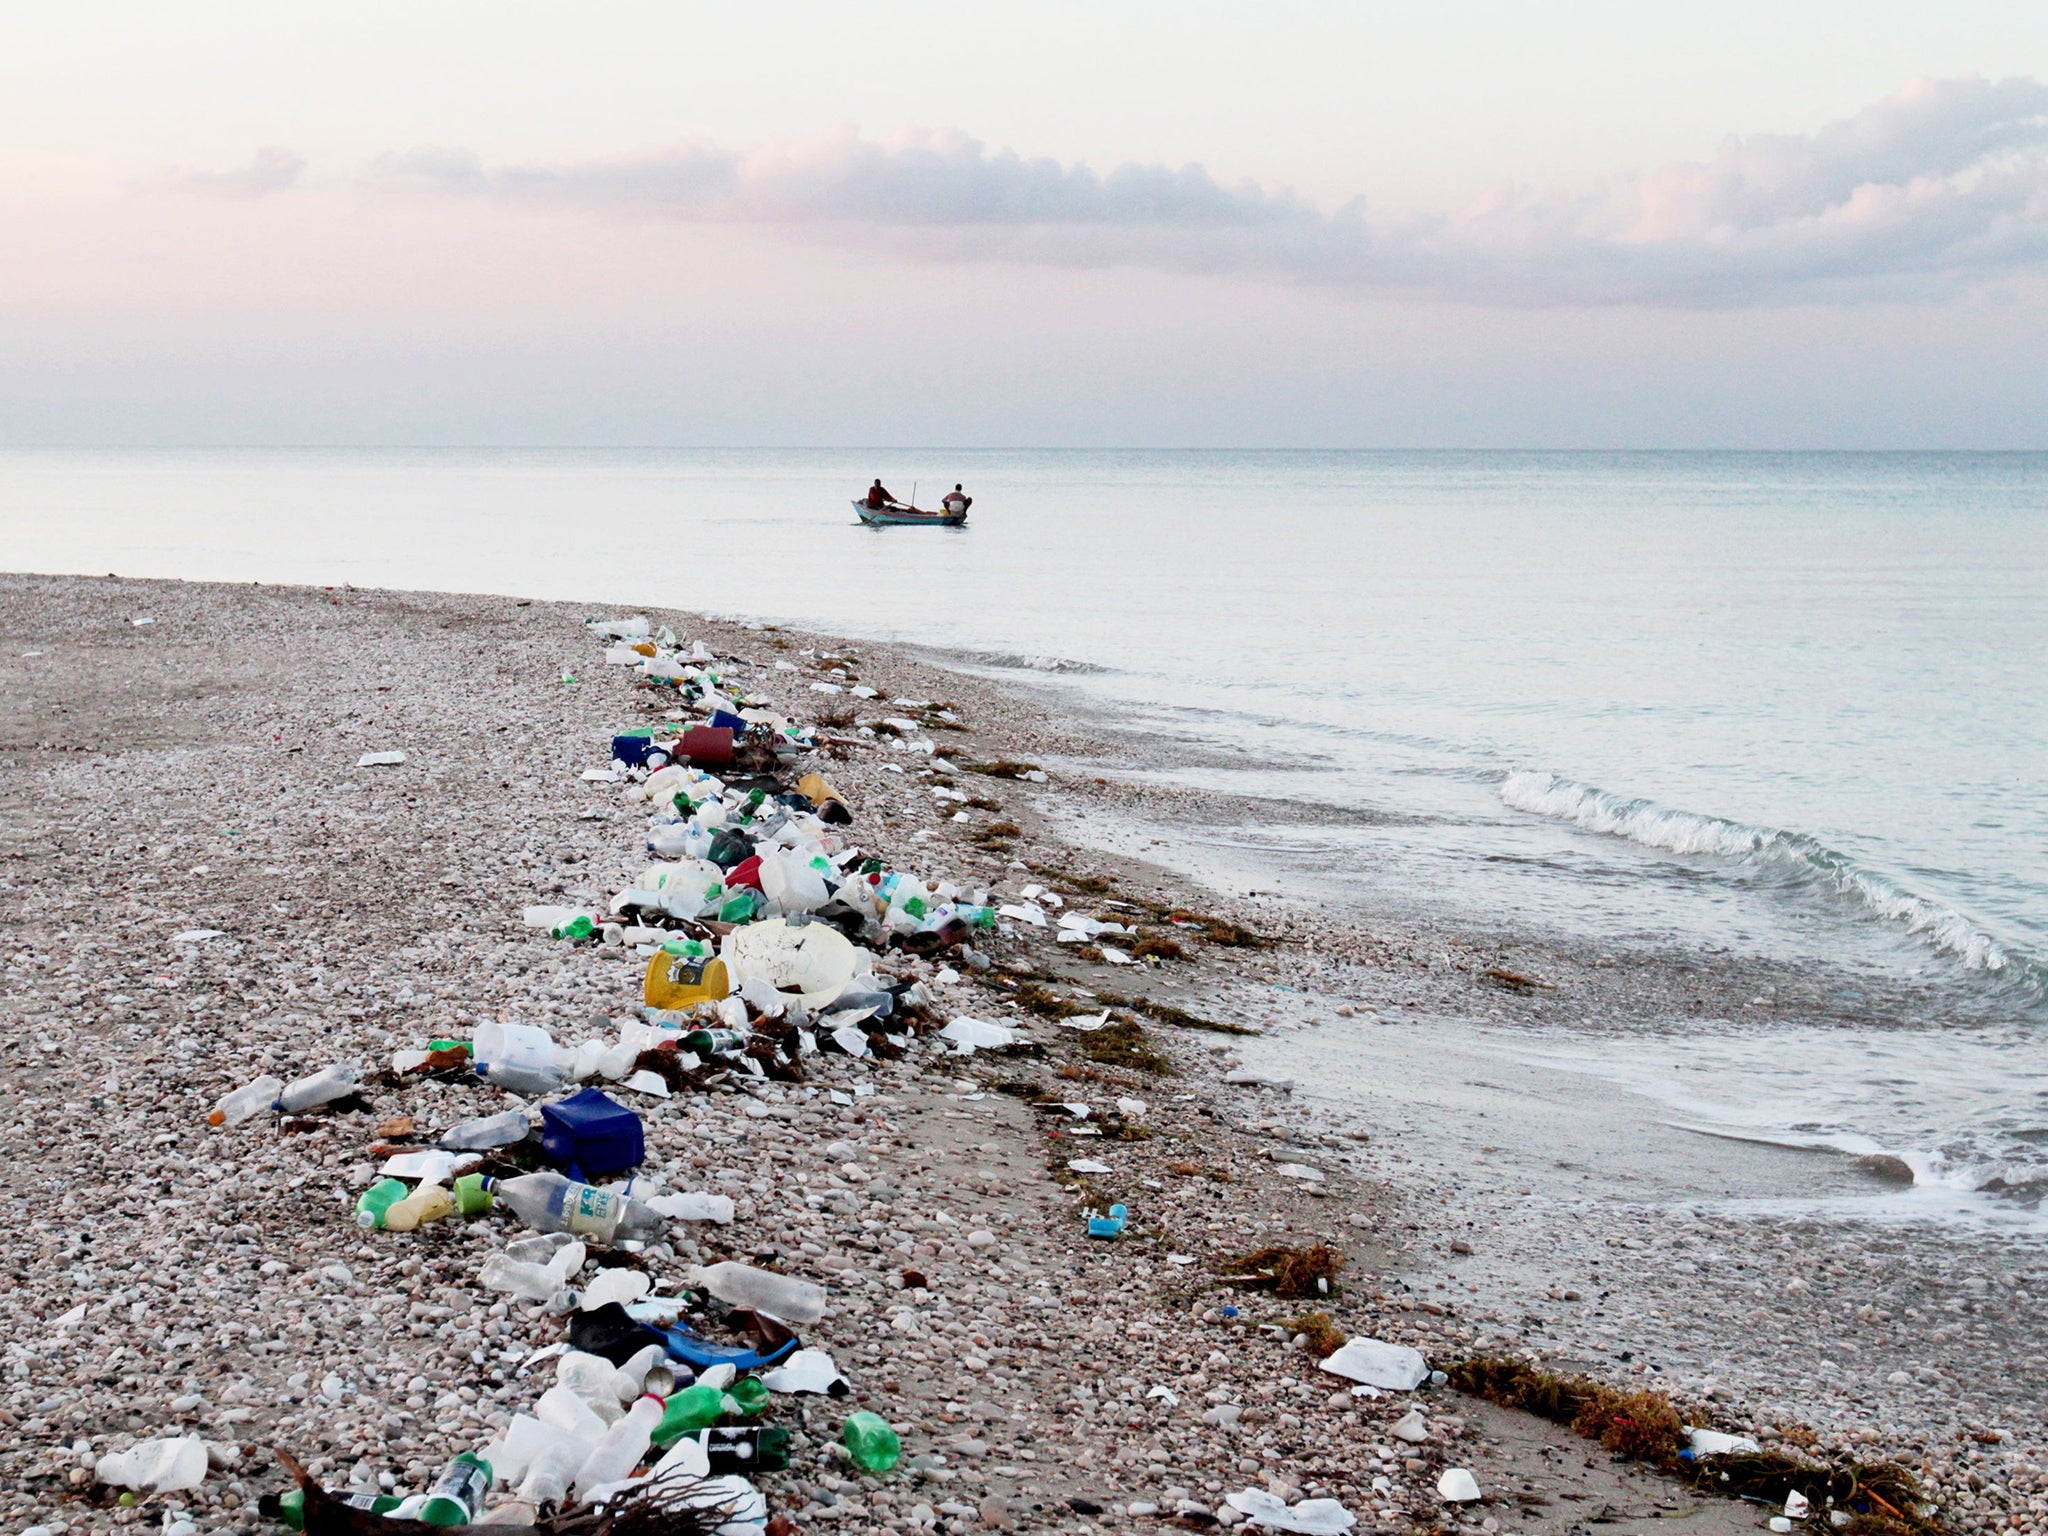 The study estimates that 8 million tons of plastic waste are dumped in the ocean each year